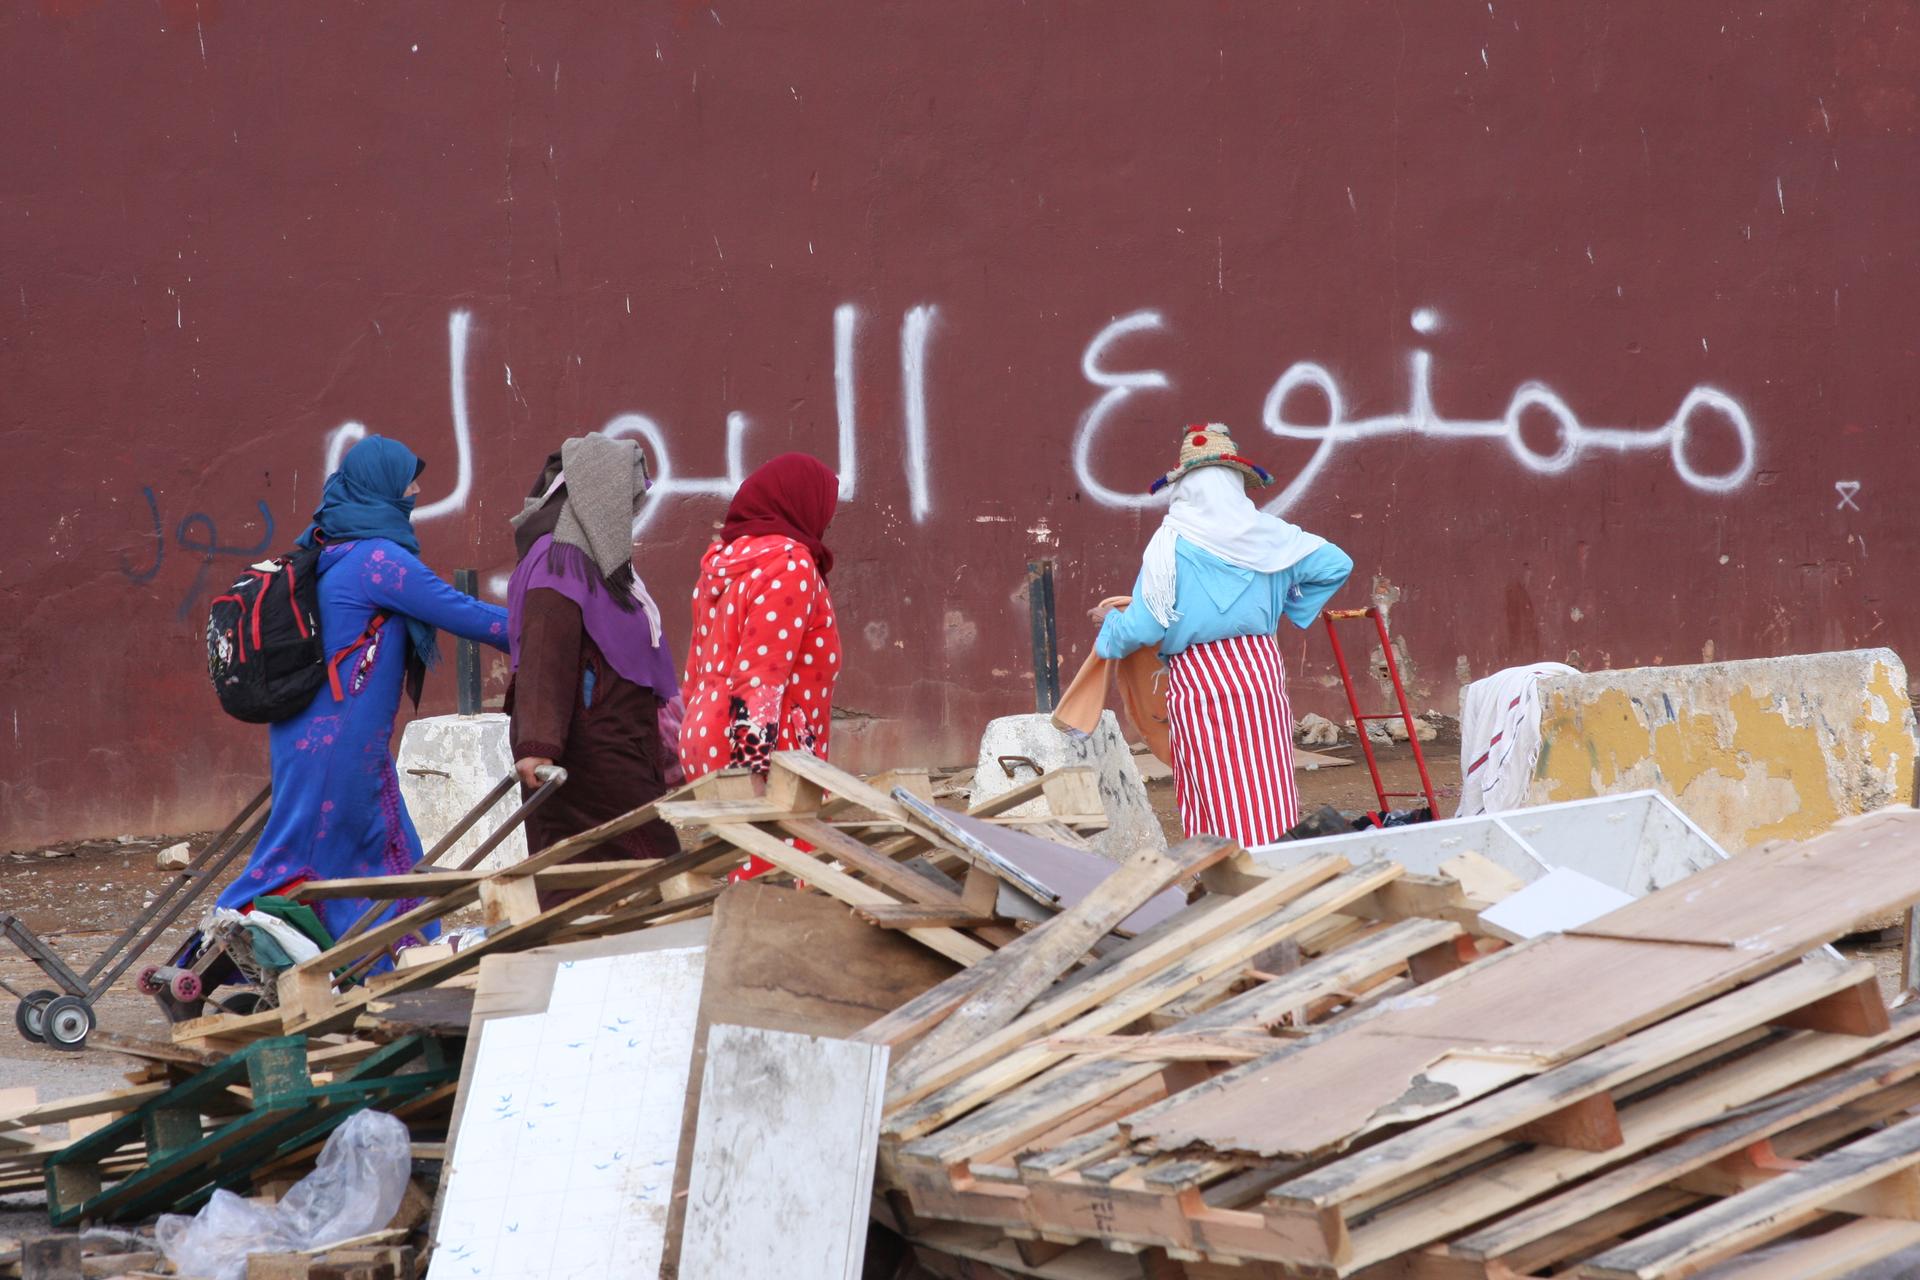 Women stand near pile of wooden debris against backdrop of red maroon wall with Arabic white letter graffitti.